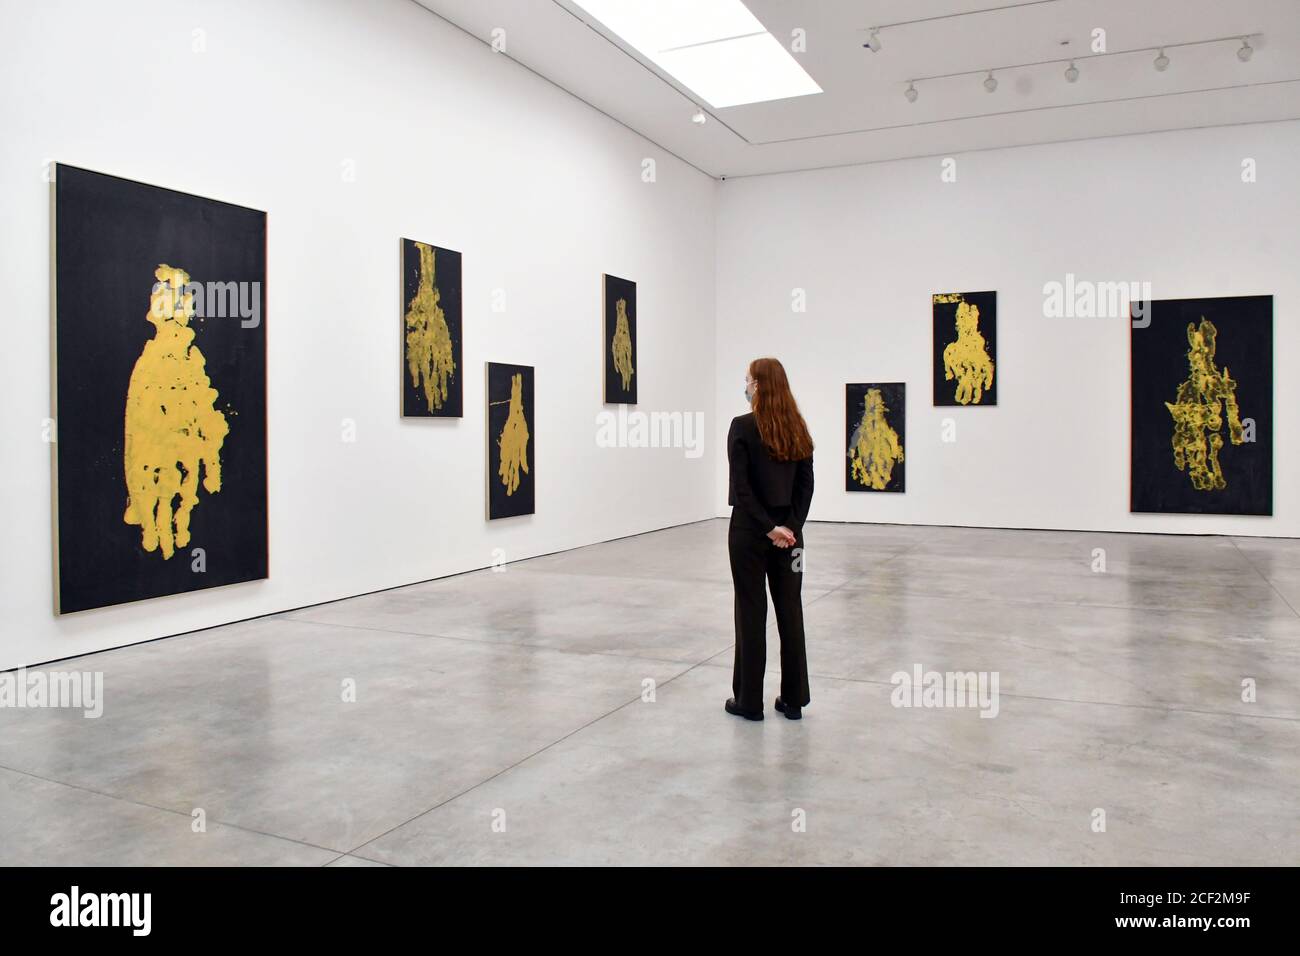 London, UK - 3 September 2020 Preview of ÔDarkness GoldnessÕ, a solo exhibition by Georg Baselitz at White Cube Mason's Yard consisting of new paintings featuring mysterious, ghostly hands rendered in gold, alongside related drawings and fire-gilded bronze reliefs, the artistÕs first sculptural works in almost a decade. (L-R) Manodopera C ArbeitskrŠfte, 2019, Per mano C an der Hand, 2019, Mano sola, 2019, Maniluvio, 2019, La mano C durchgehen, 2019, Mano, 2019, Manritta C rechte Hand, 2019    Credit: Nils Jorgensen/Alamy Live News Stock Photo